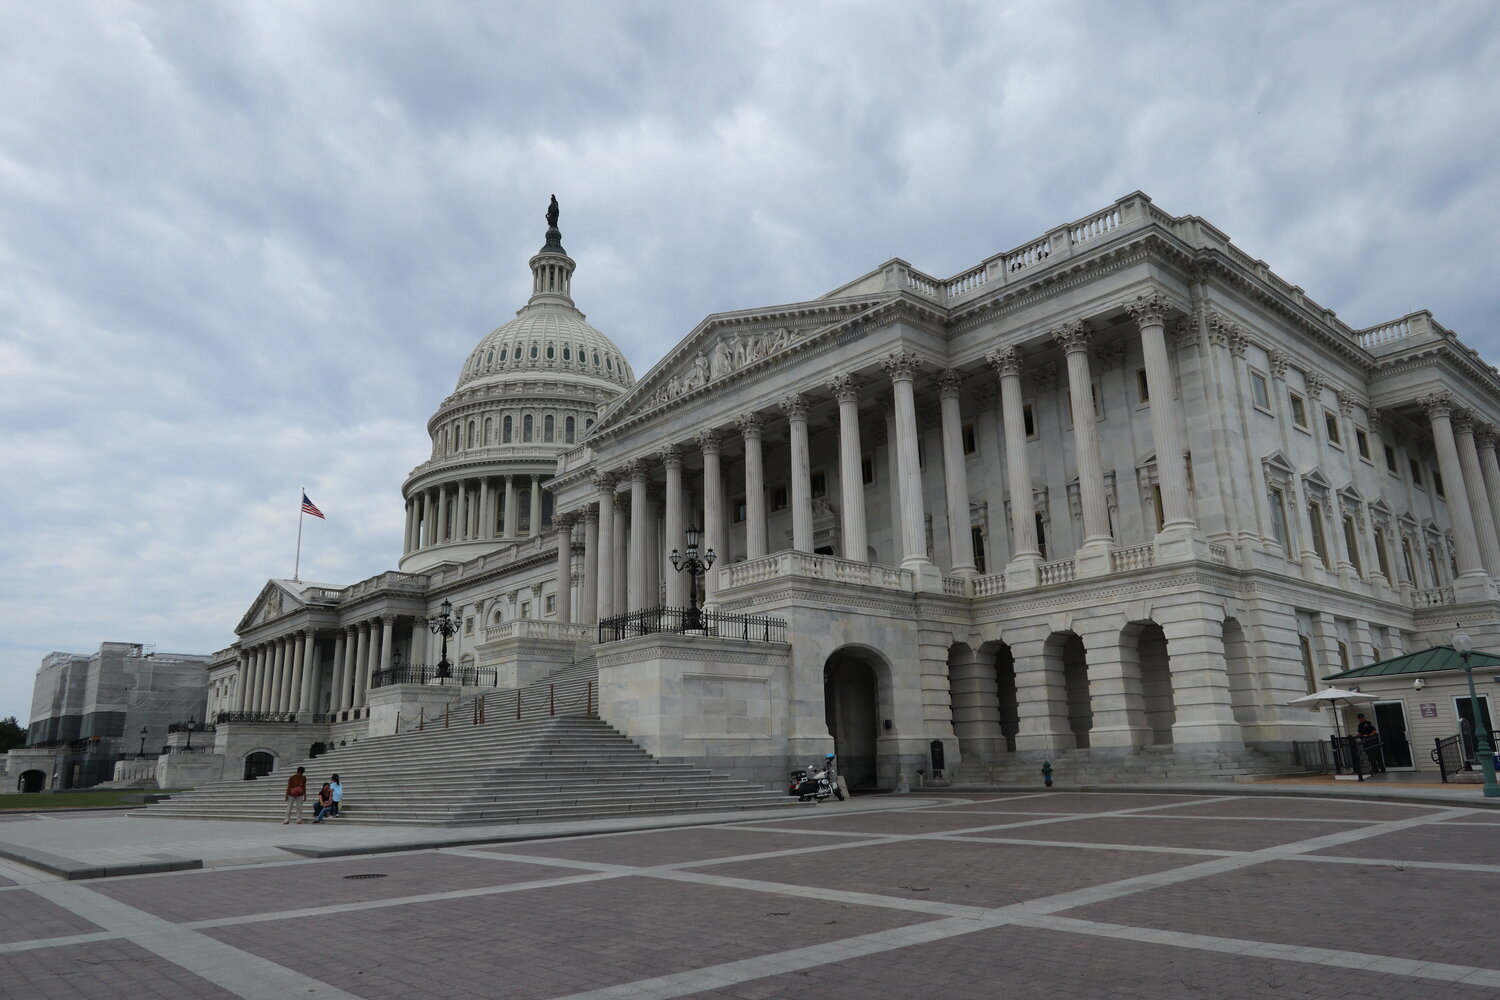 The United States Capitol (2019年7月撮影)